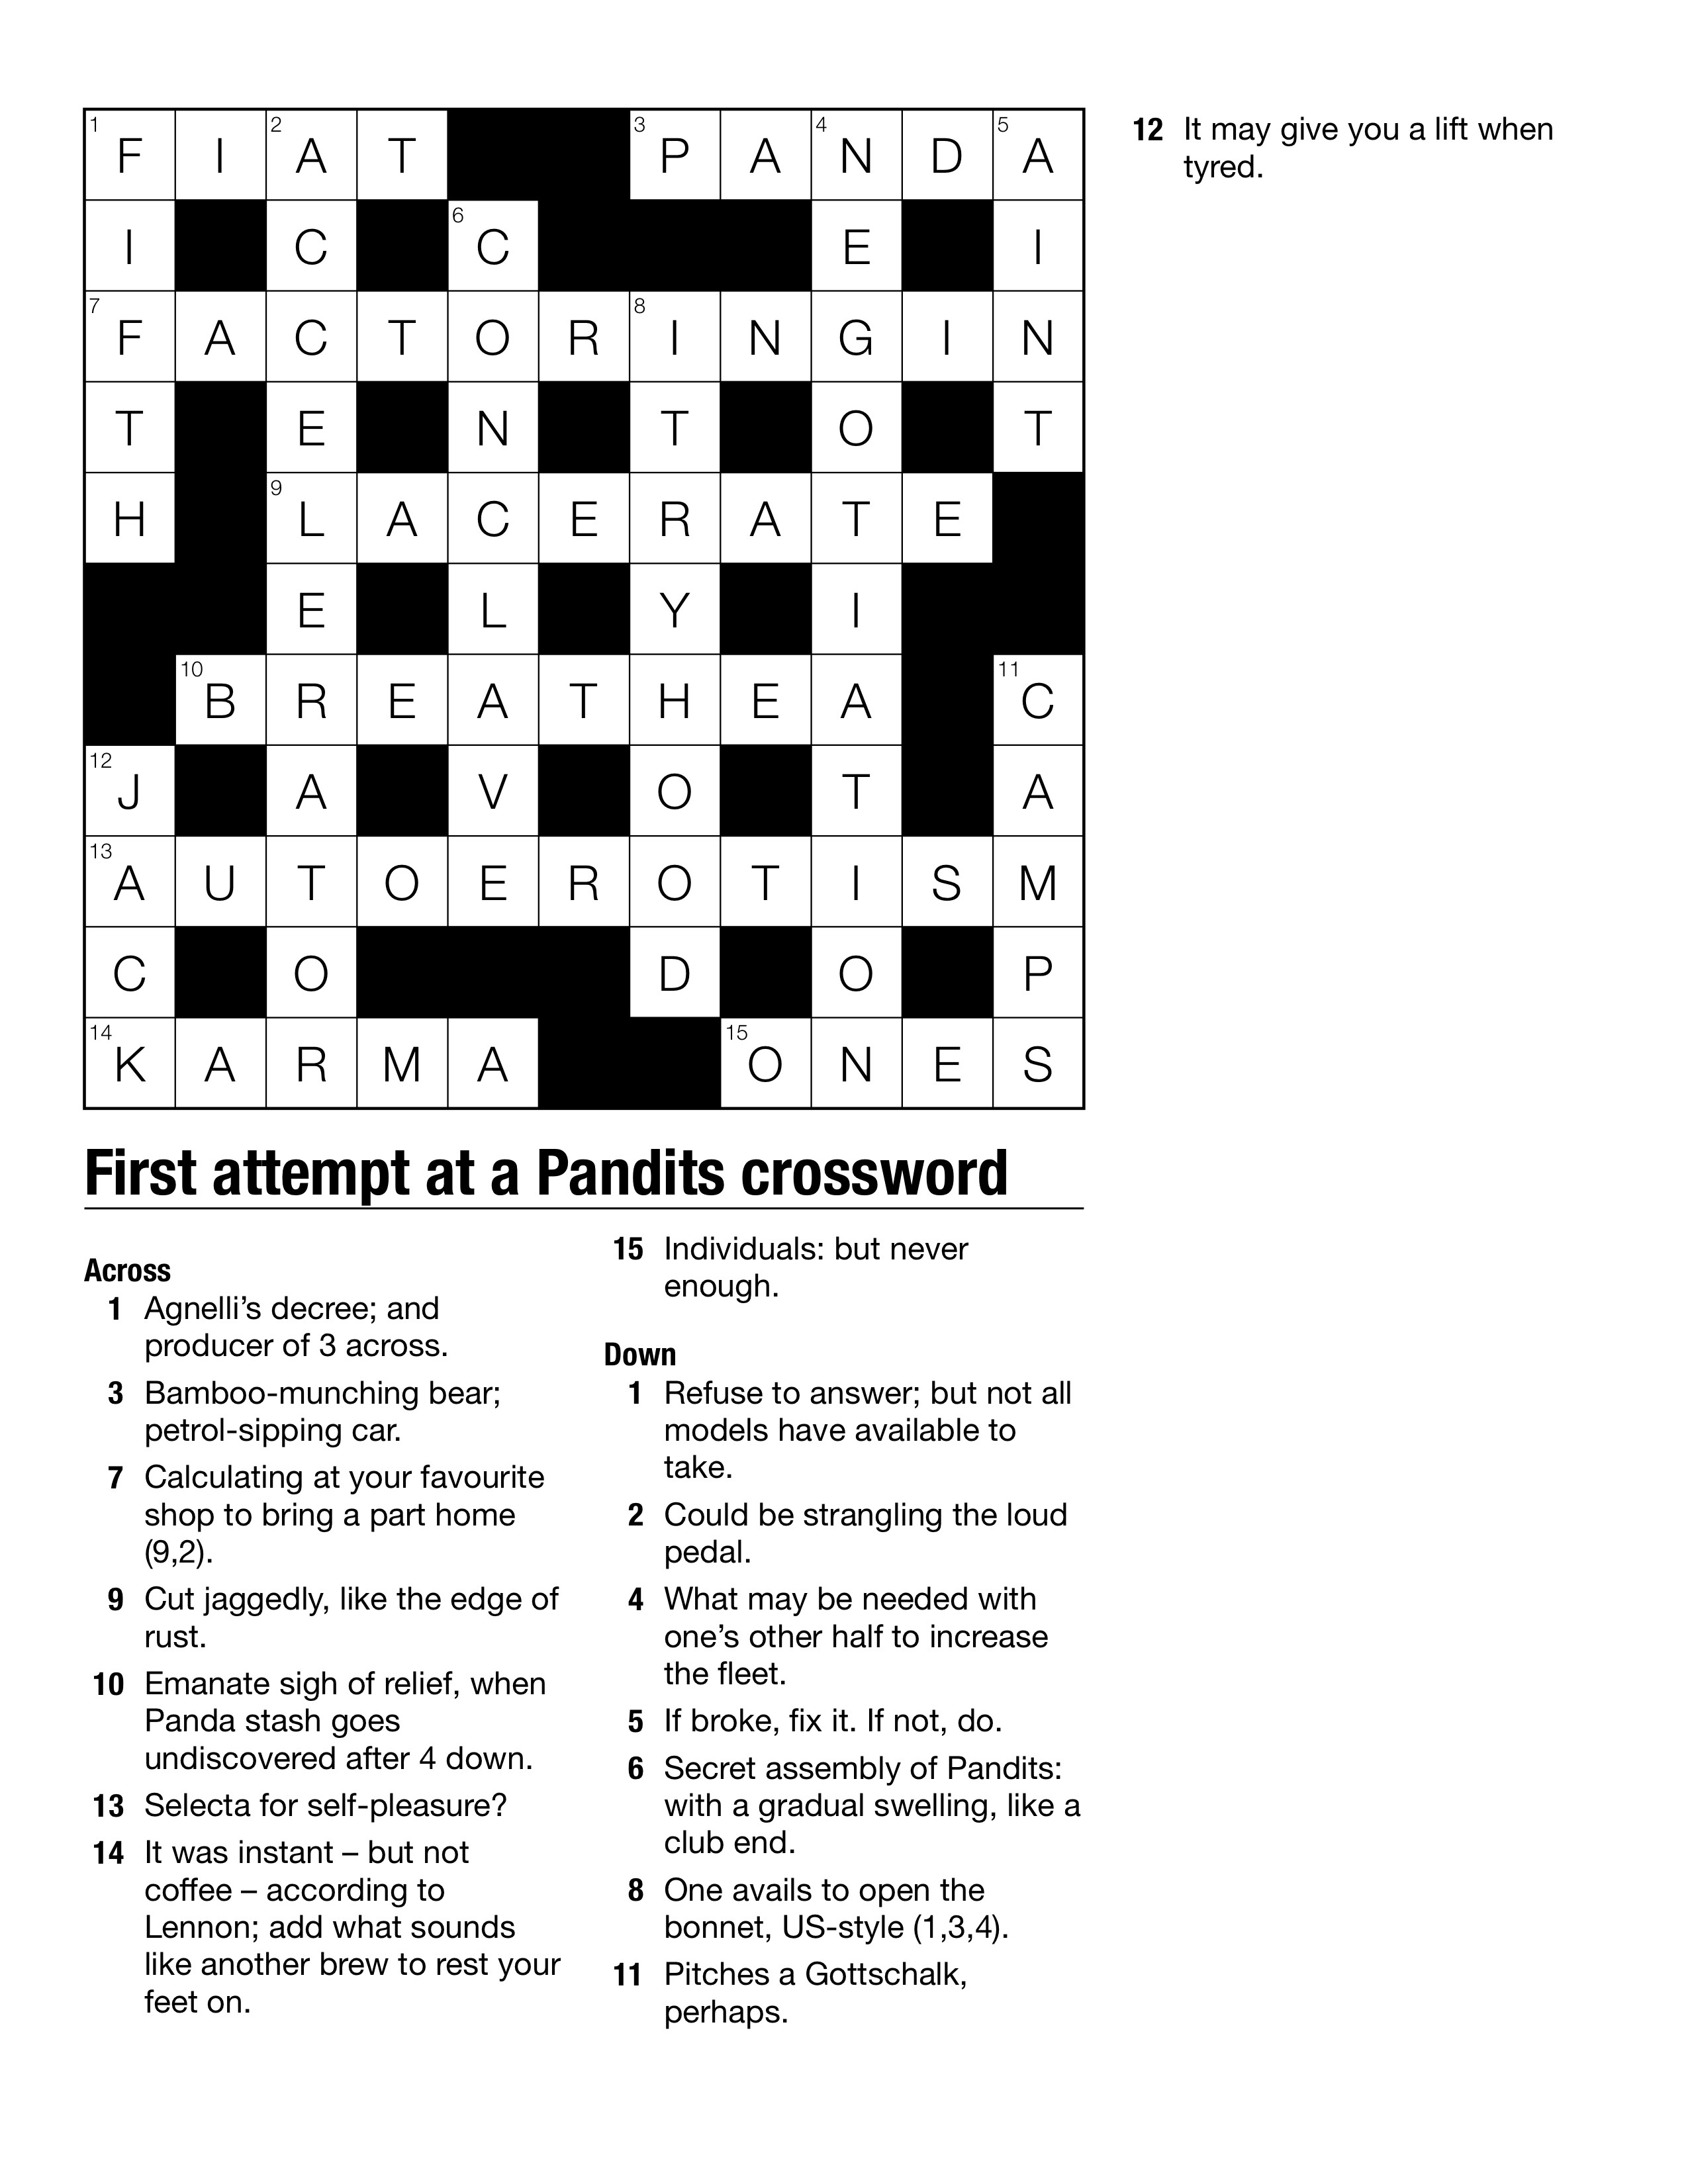 Completed crossword #1 (correct)